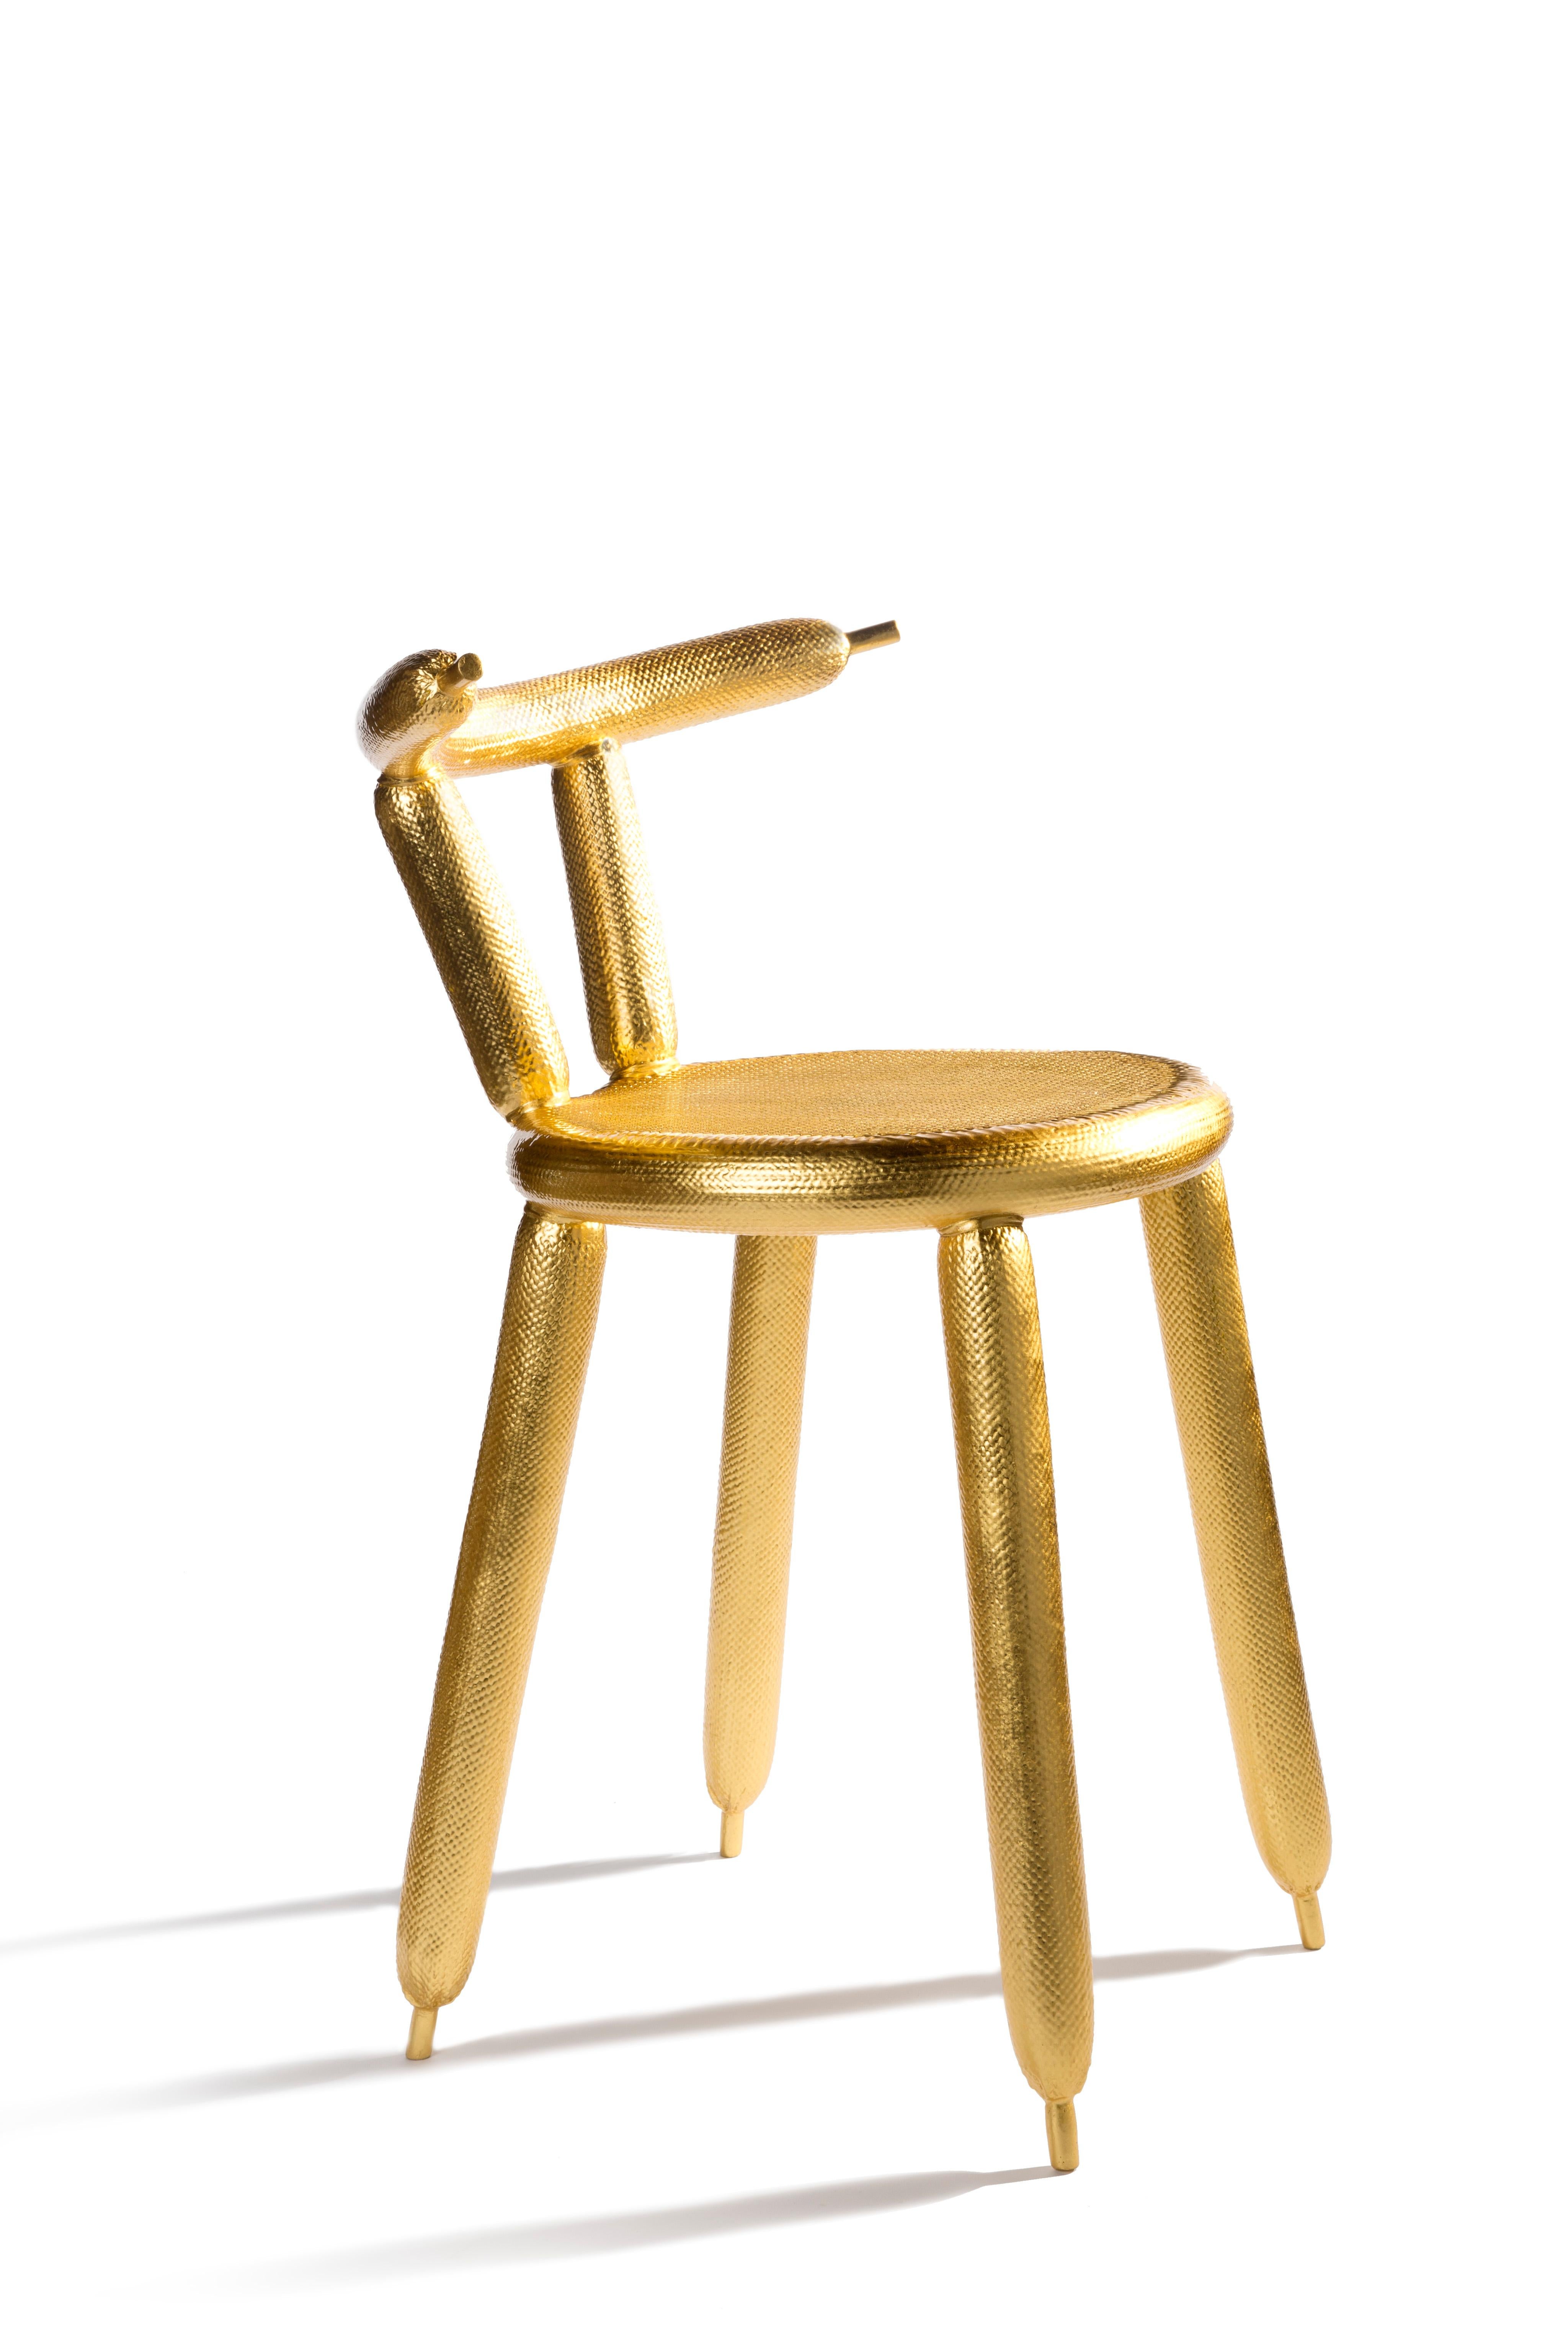 Brushed Carbon Balloon Chair Gold, by Marcel Wanders, 2013, Limited Edition #2/5 For Sale